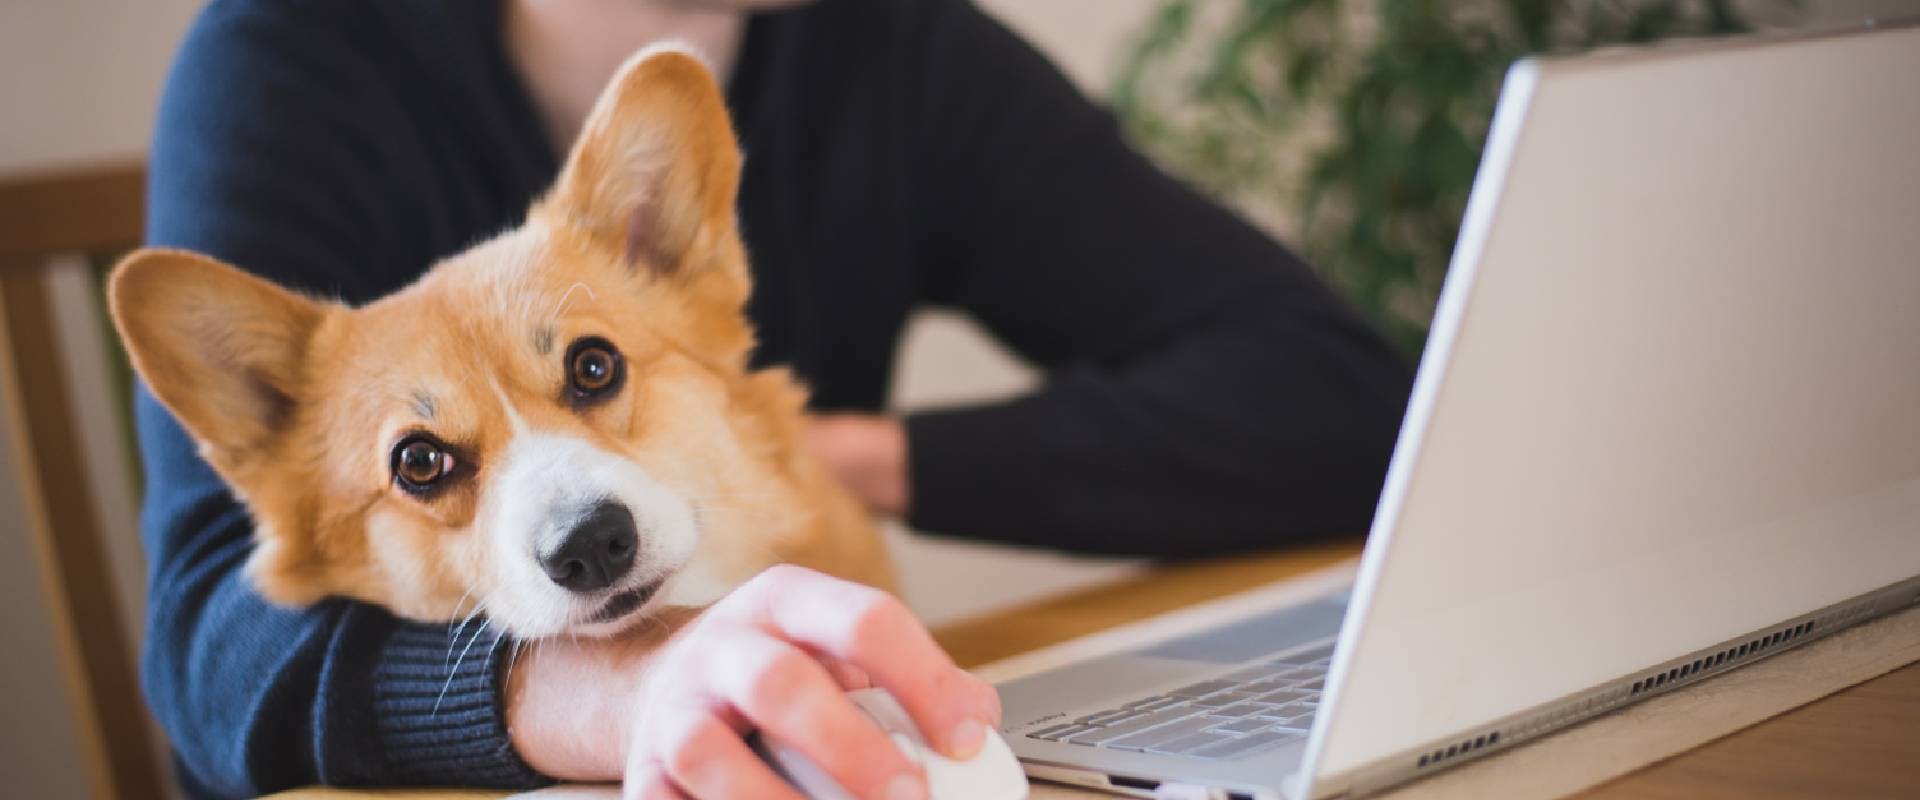 Corgi sat with person on a laptop